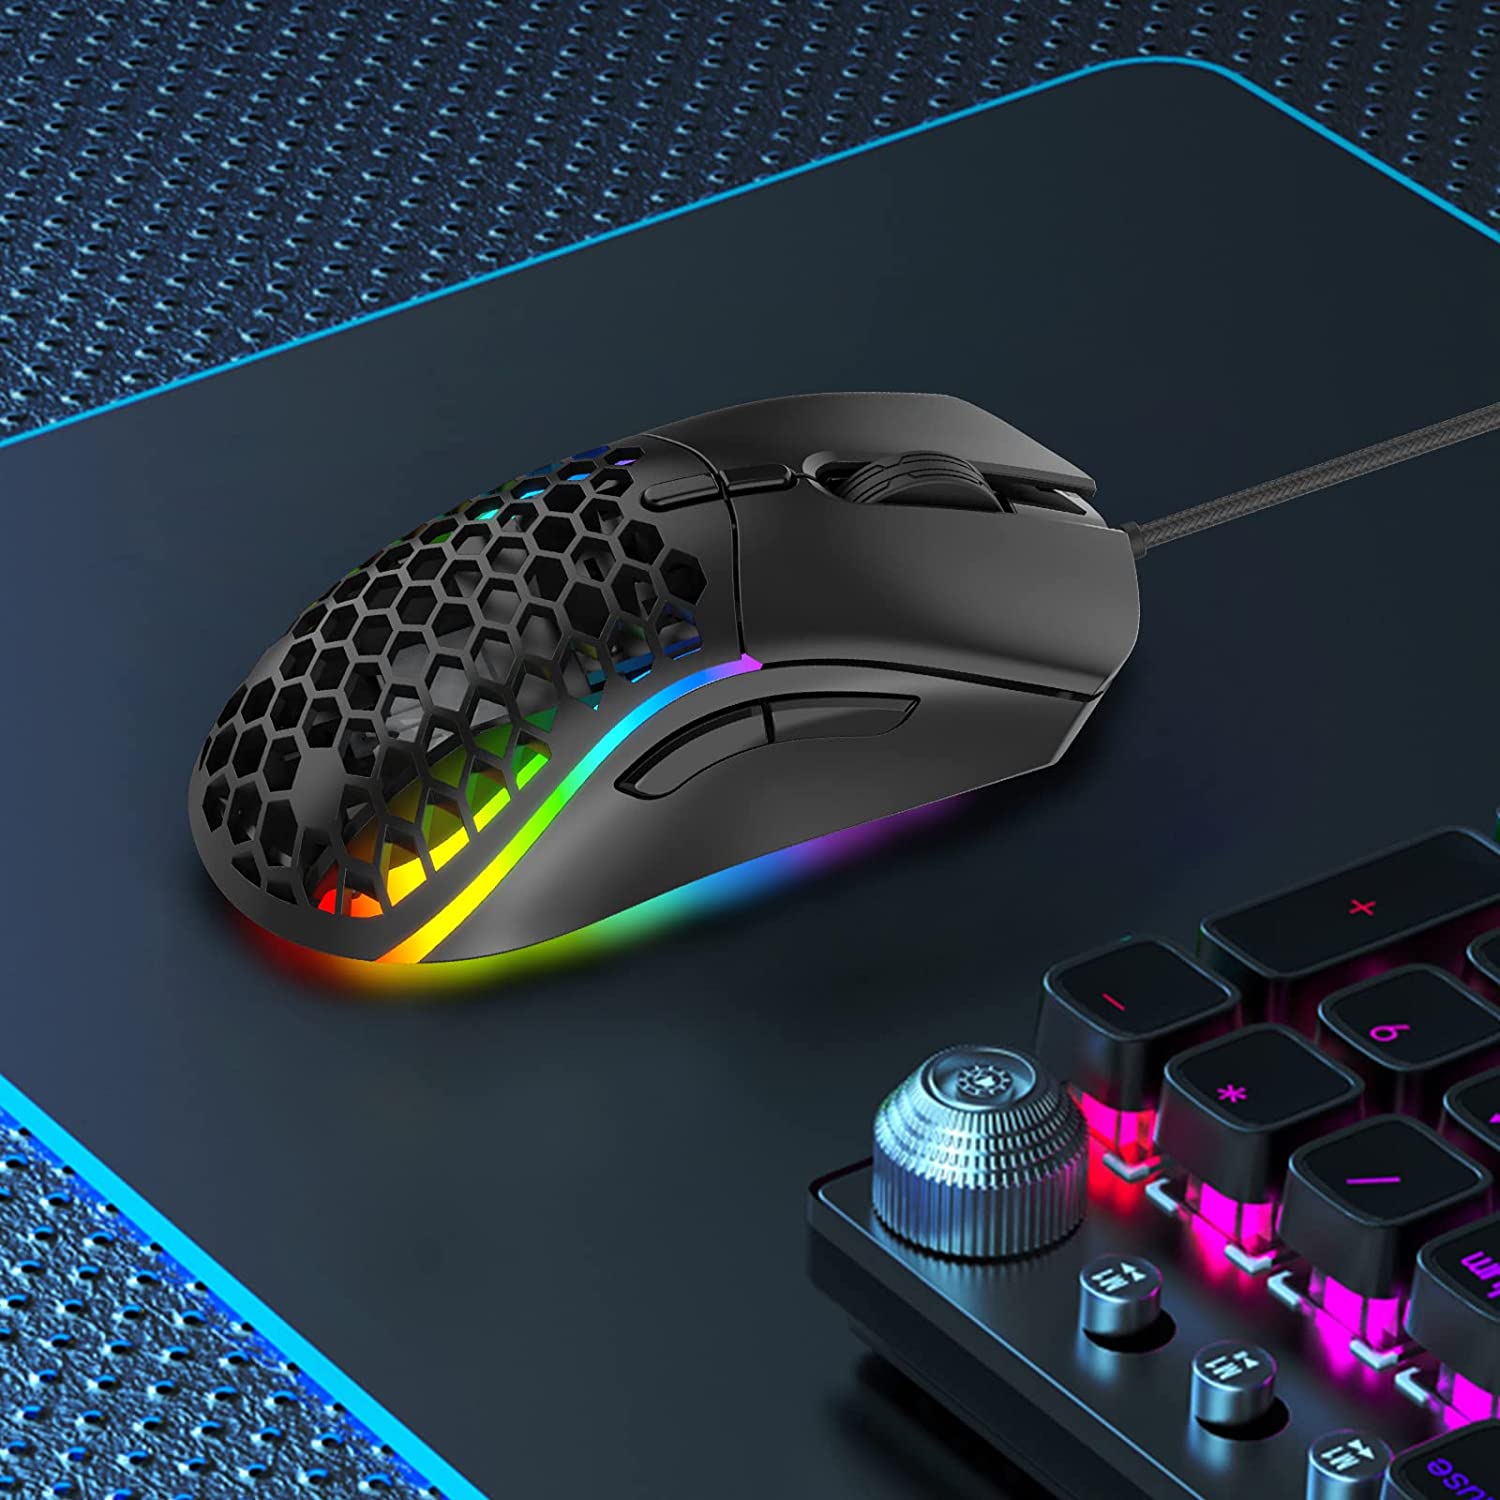 Y-FRUITFUL-Game-Mouse-Silent-RGB-2-in-1-Wired-Gaming-mouse-Replaceable-Housing-Ergonomic-Gamer-Mouse-6-Button-12000DPI-Computer-Mice-For-PC-Labtop-62